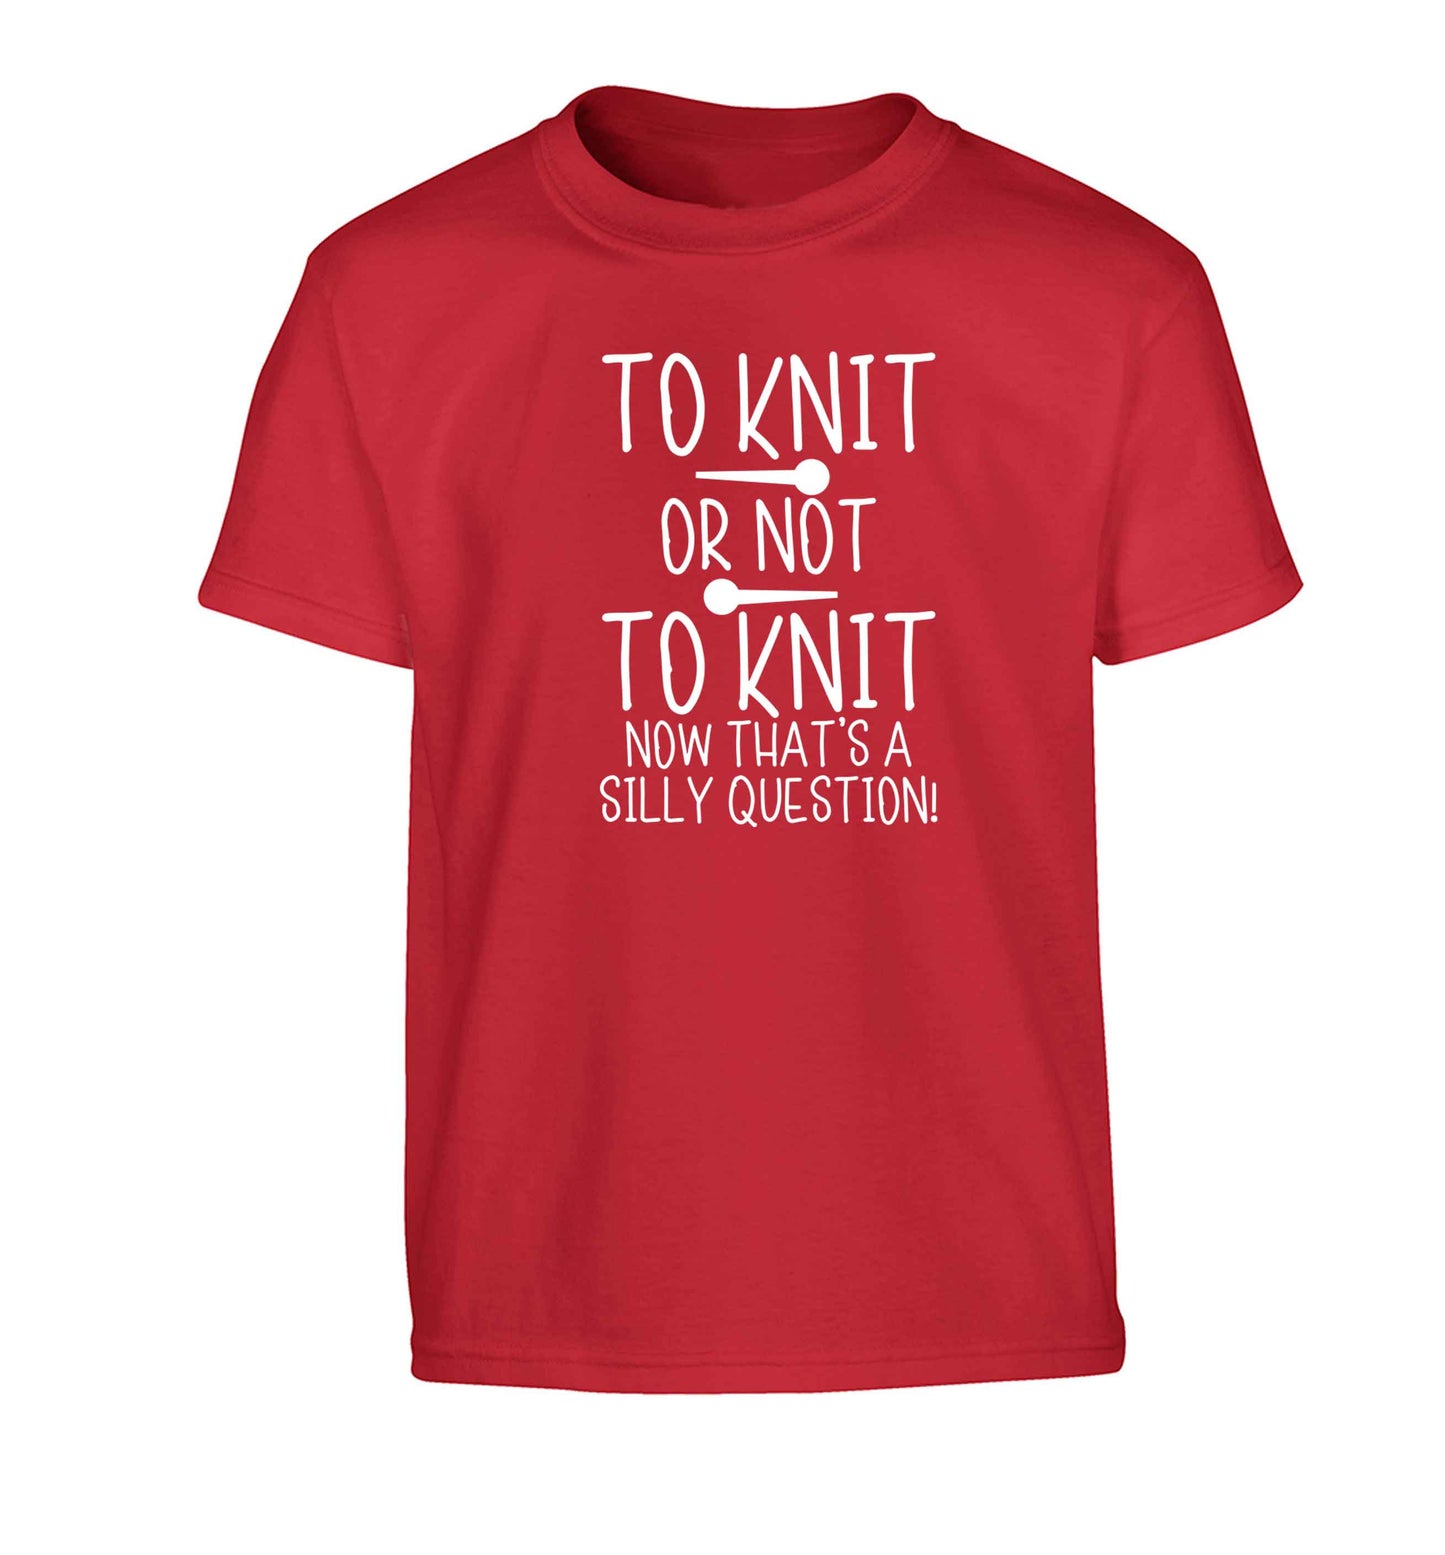 To knit or not to knit now that's a silly question Children's red Tshirt 12-13 Years